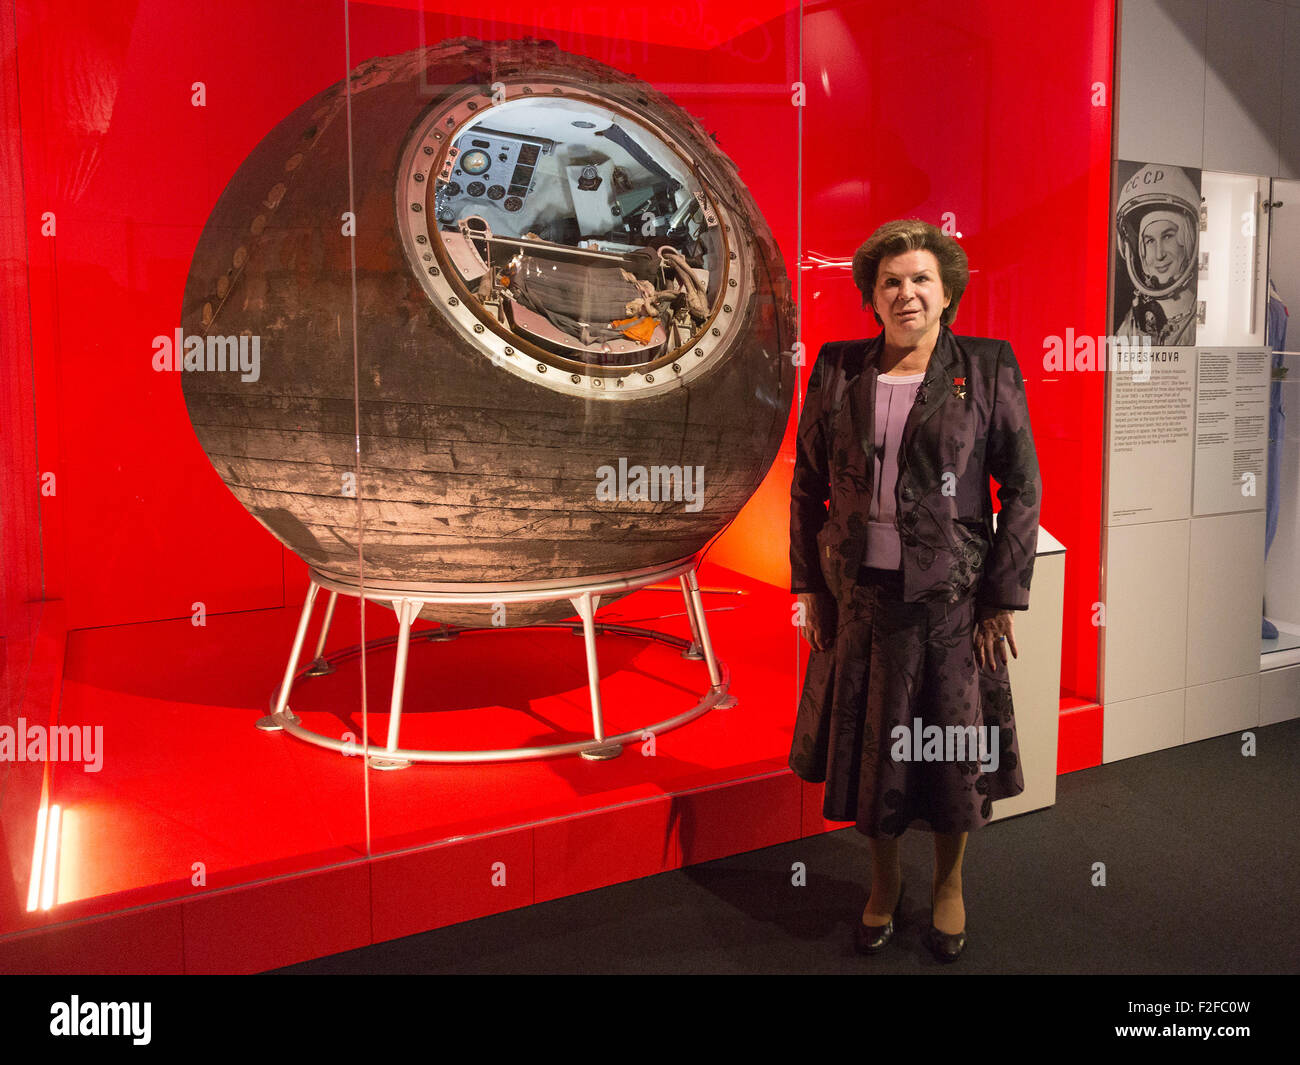 London, UK. 17/09/2015. Valentina Tereshkova opens the exhibition and is reunited with Vostok-6, the actual spacecraft that took her into space. The exhibition Cosmonauts - Birth of the Space Age opens at the Science Museum on 18 September 2015 and runs until 13 March 2016. Stock Photo